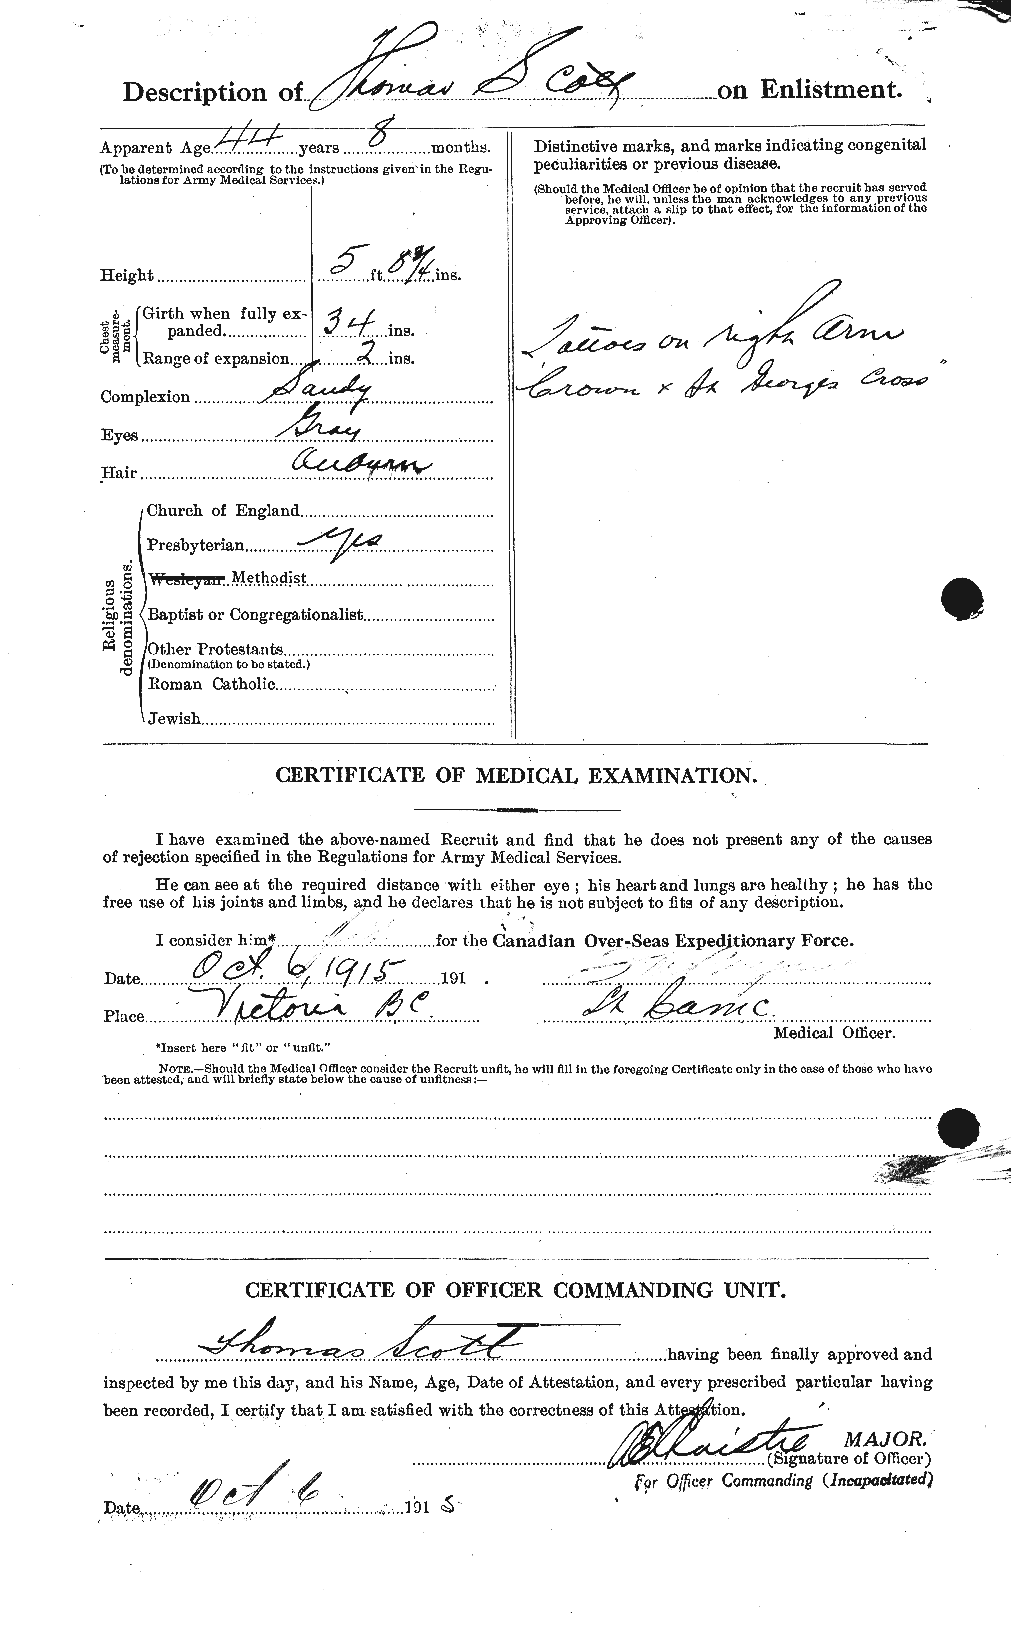 Personnel Records of the First World War - CEF 088538b